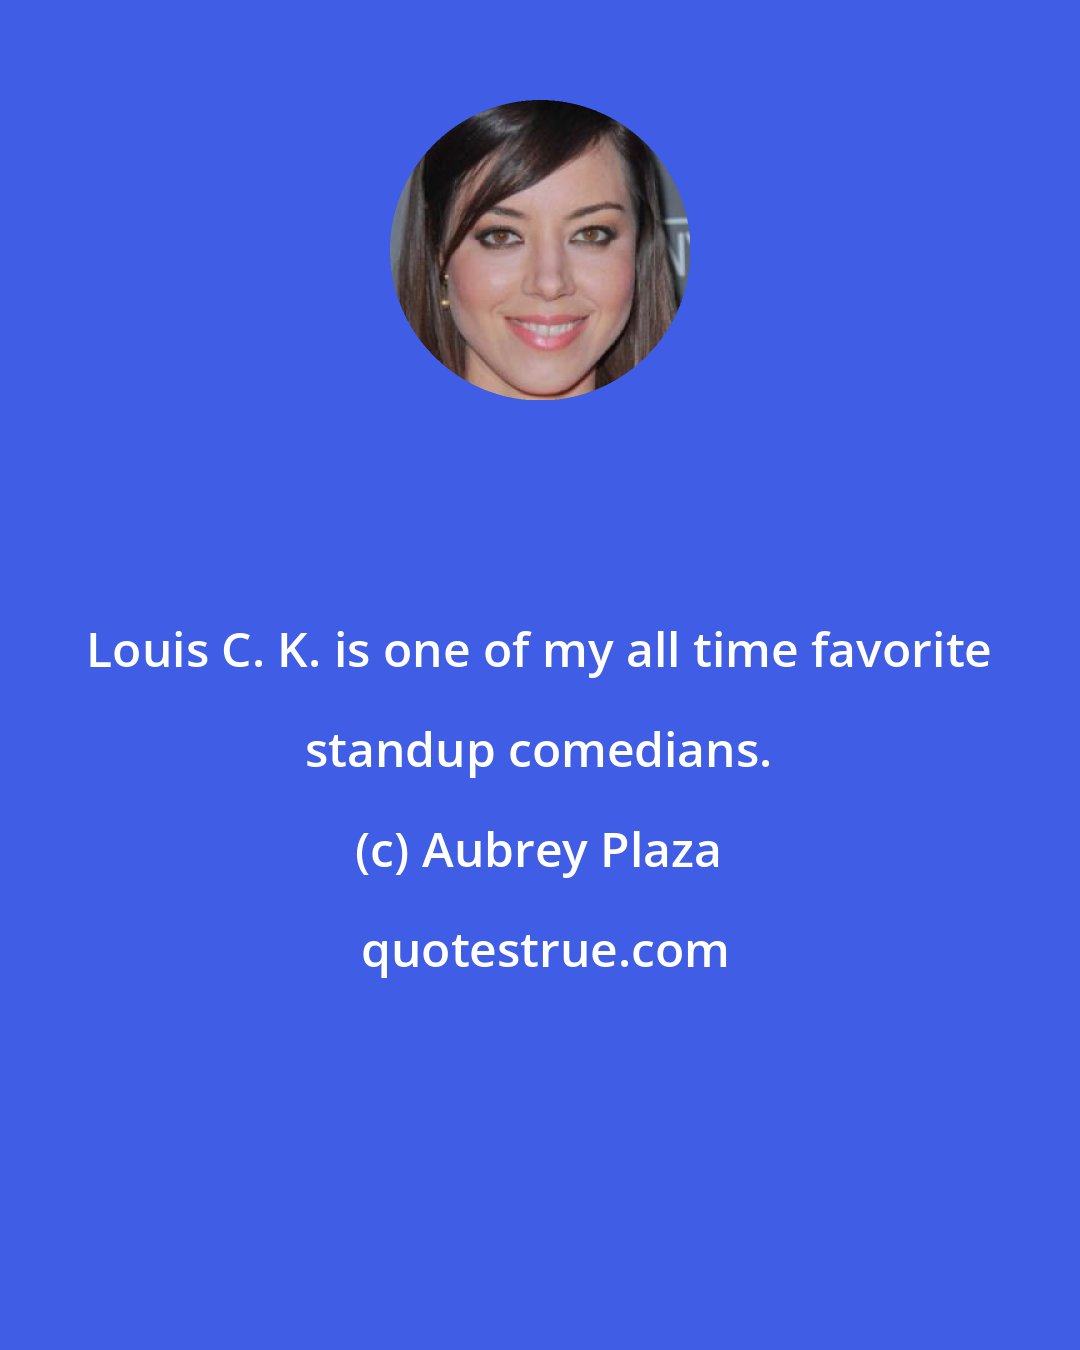 Aubrey Plaza: Louis C. K. is one of my all time favorite standup comedians.